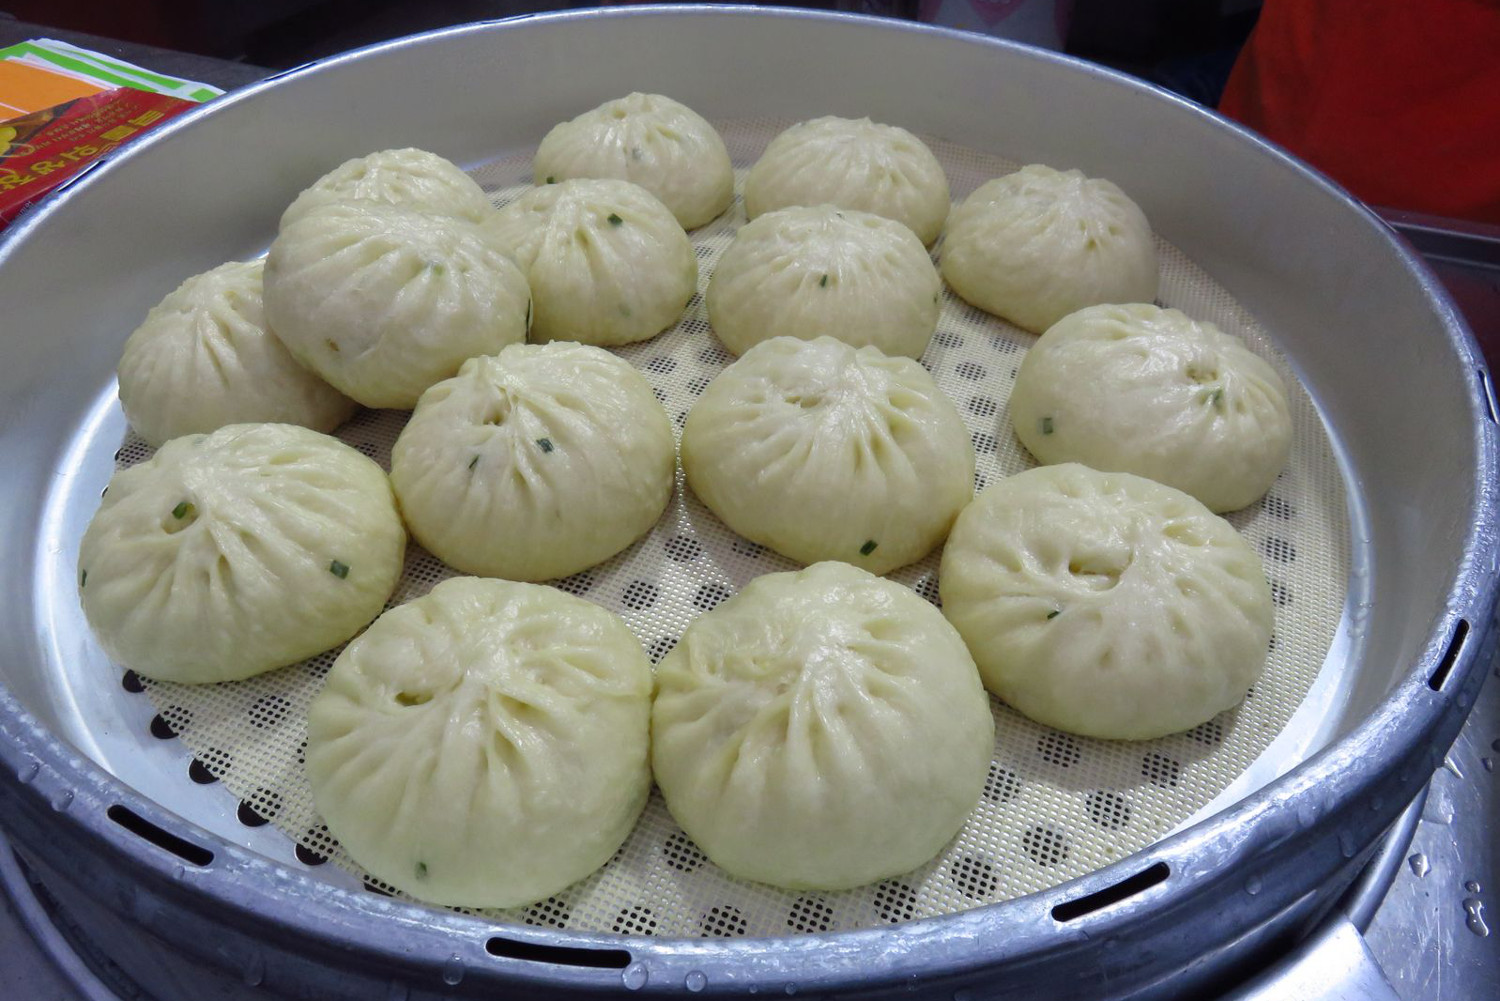 Steamed dumplings are a traditional street snack throughout Korea. Image by Phillip Tang / Lonely Planet